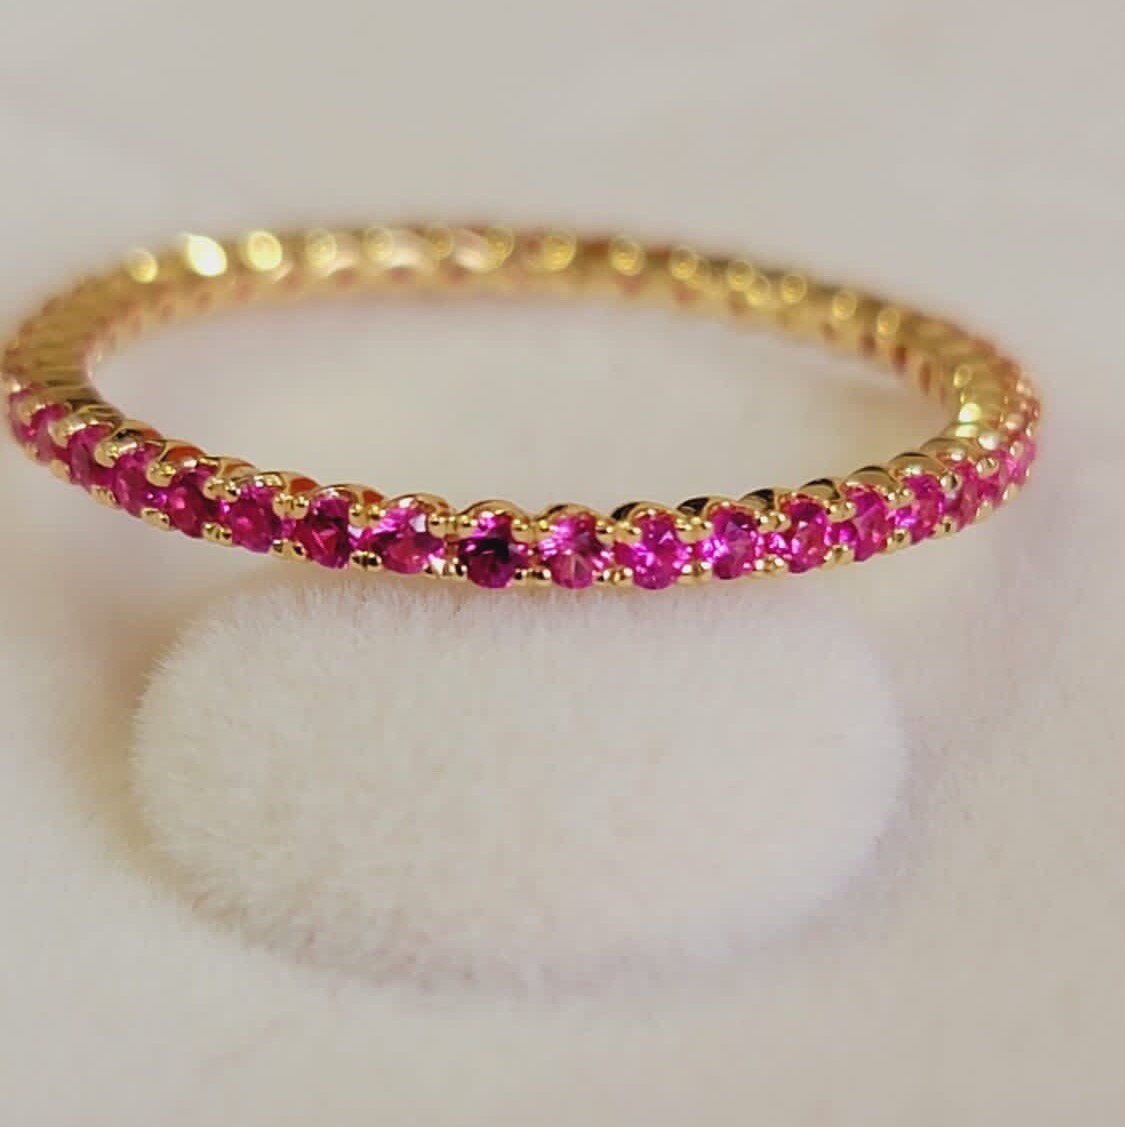 Natural Ruby Eternity Ring, 14K Solid Gold Eternity Band, Ruby Wedding Band, July Birthstone Band, Stackable Ring, Unique Wedding Band Women